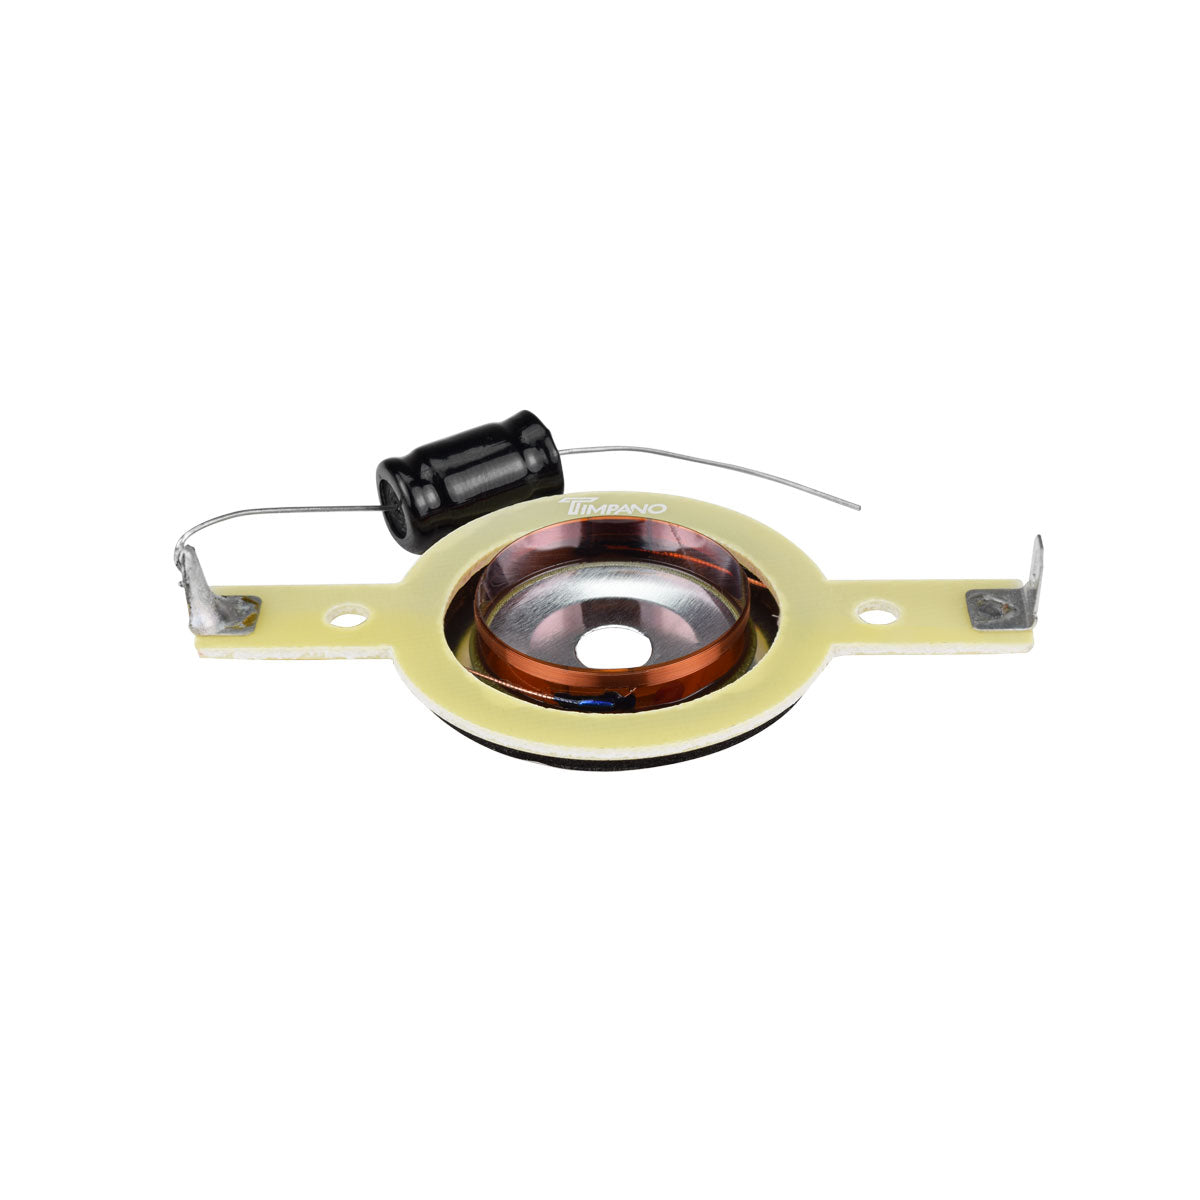 TPT-RPST3 Replacement Diaphragm for the TPT-ST3 Black